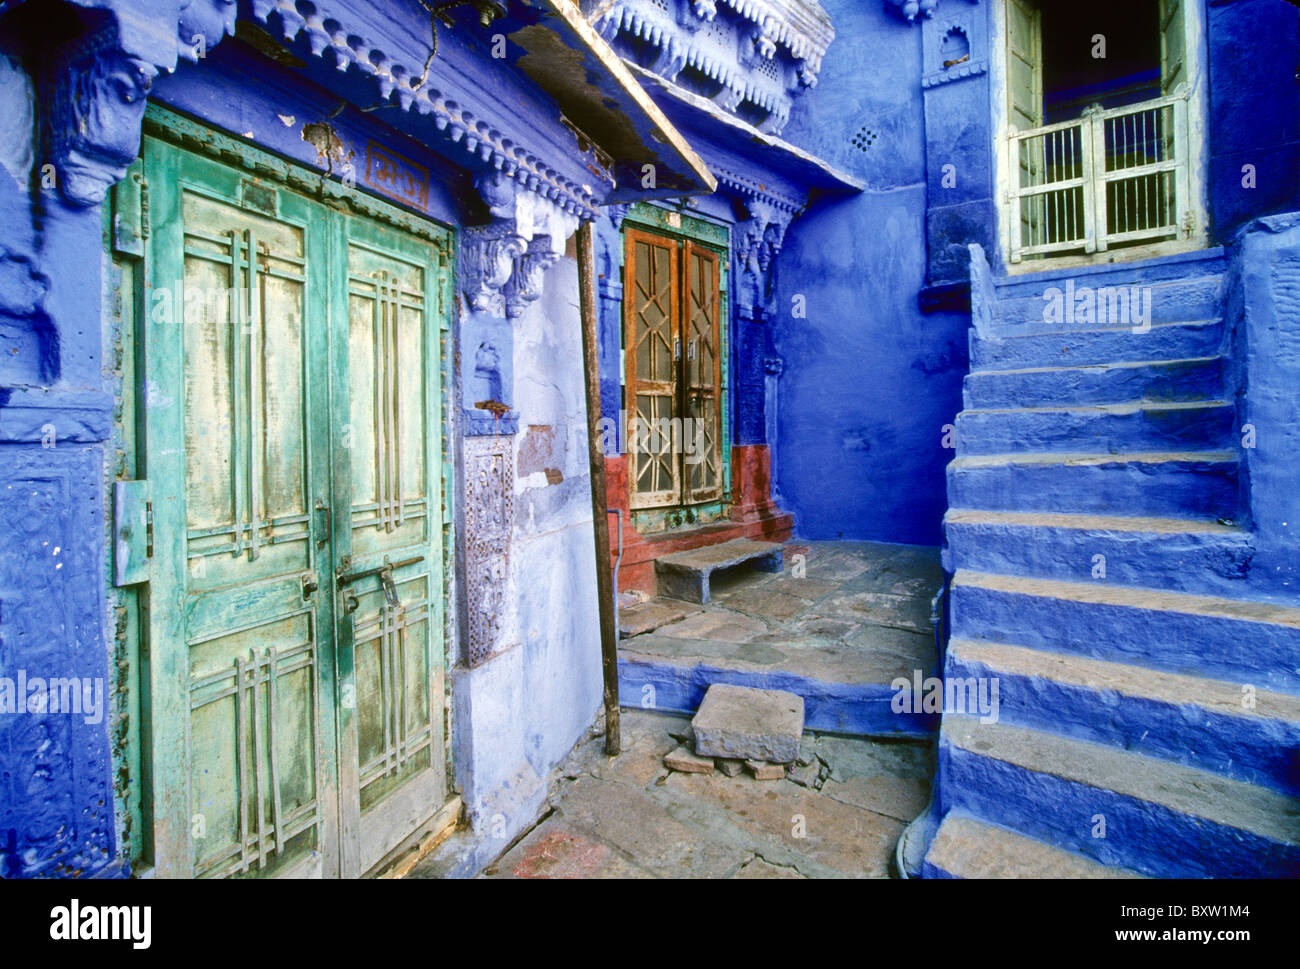 Houses in the Blue City, Jodhpur, Rajasthan, India Stock Photo